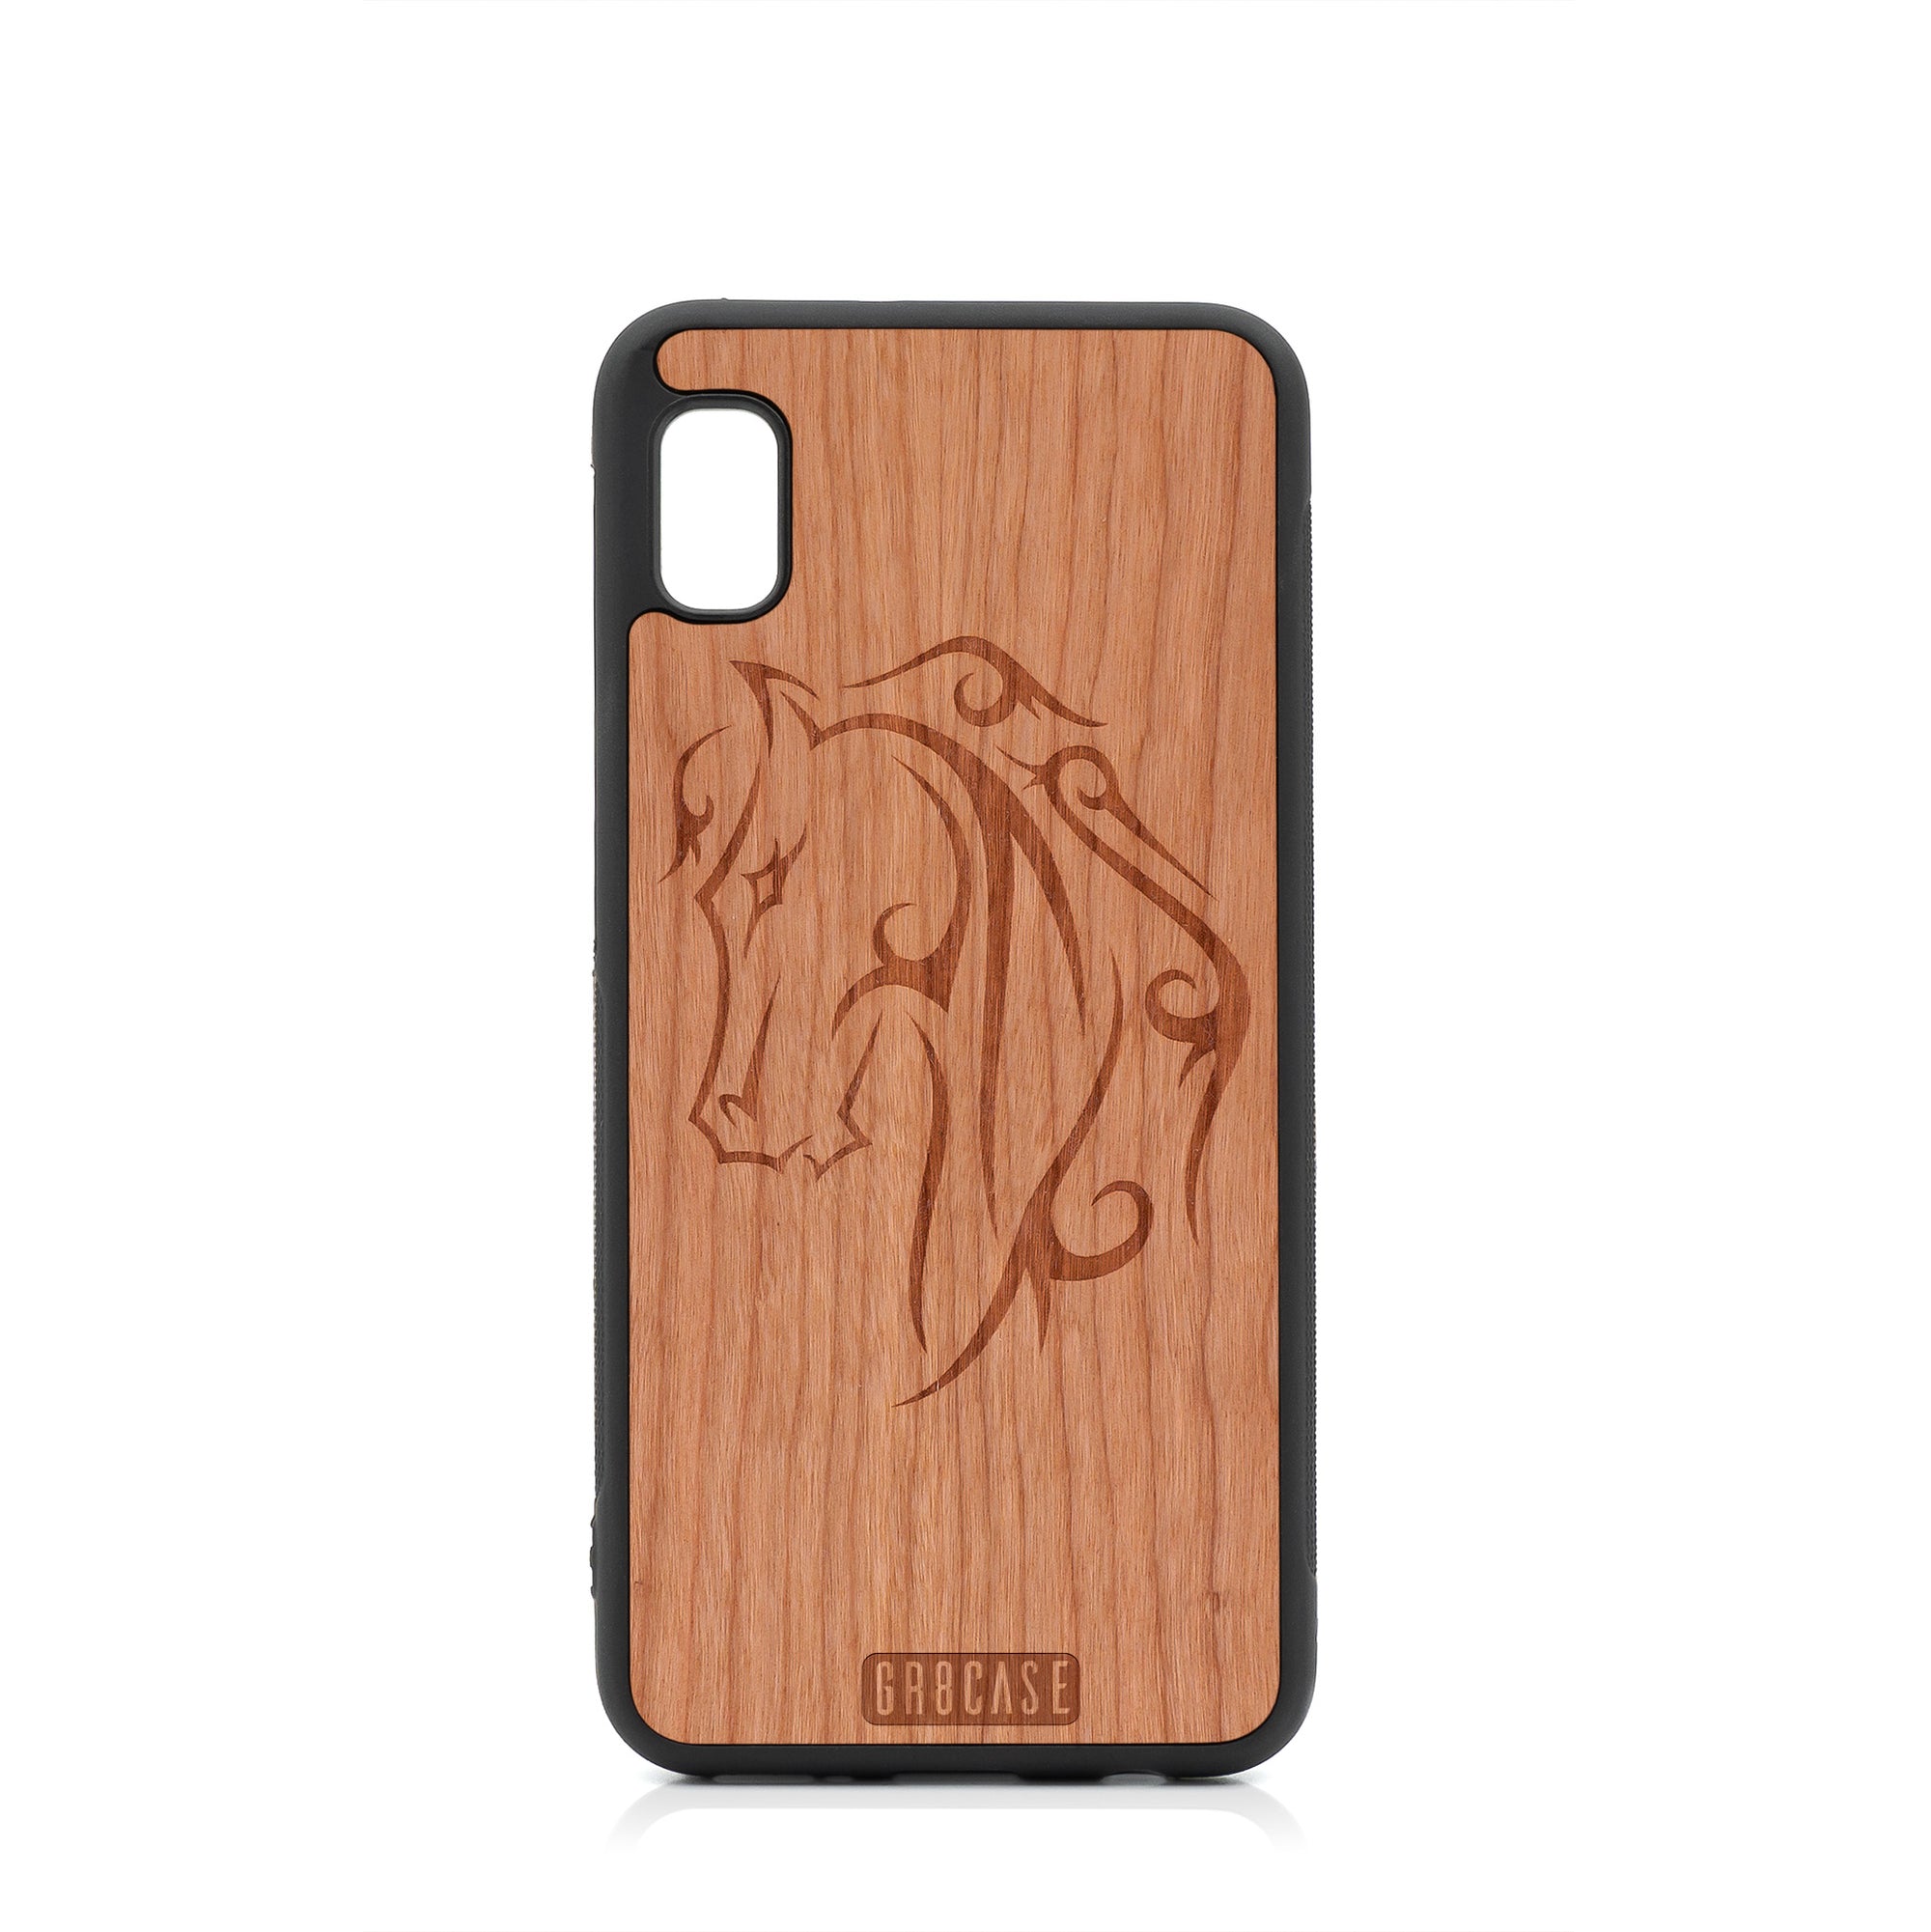 Horse Tattoo Design Wood Case For Samsung Galaxy A10E by GR8CASE